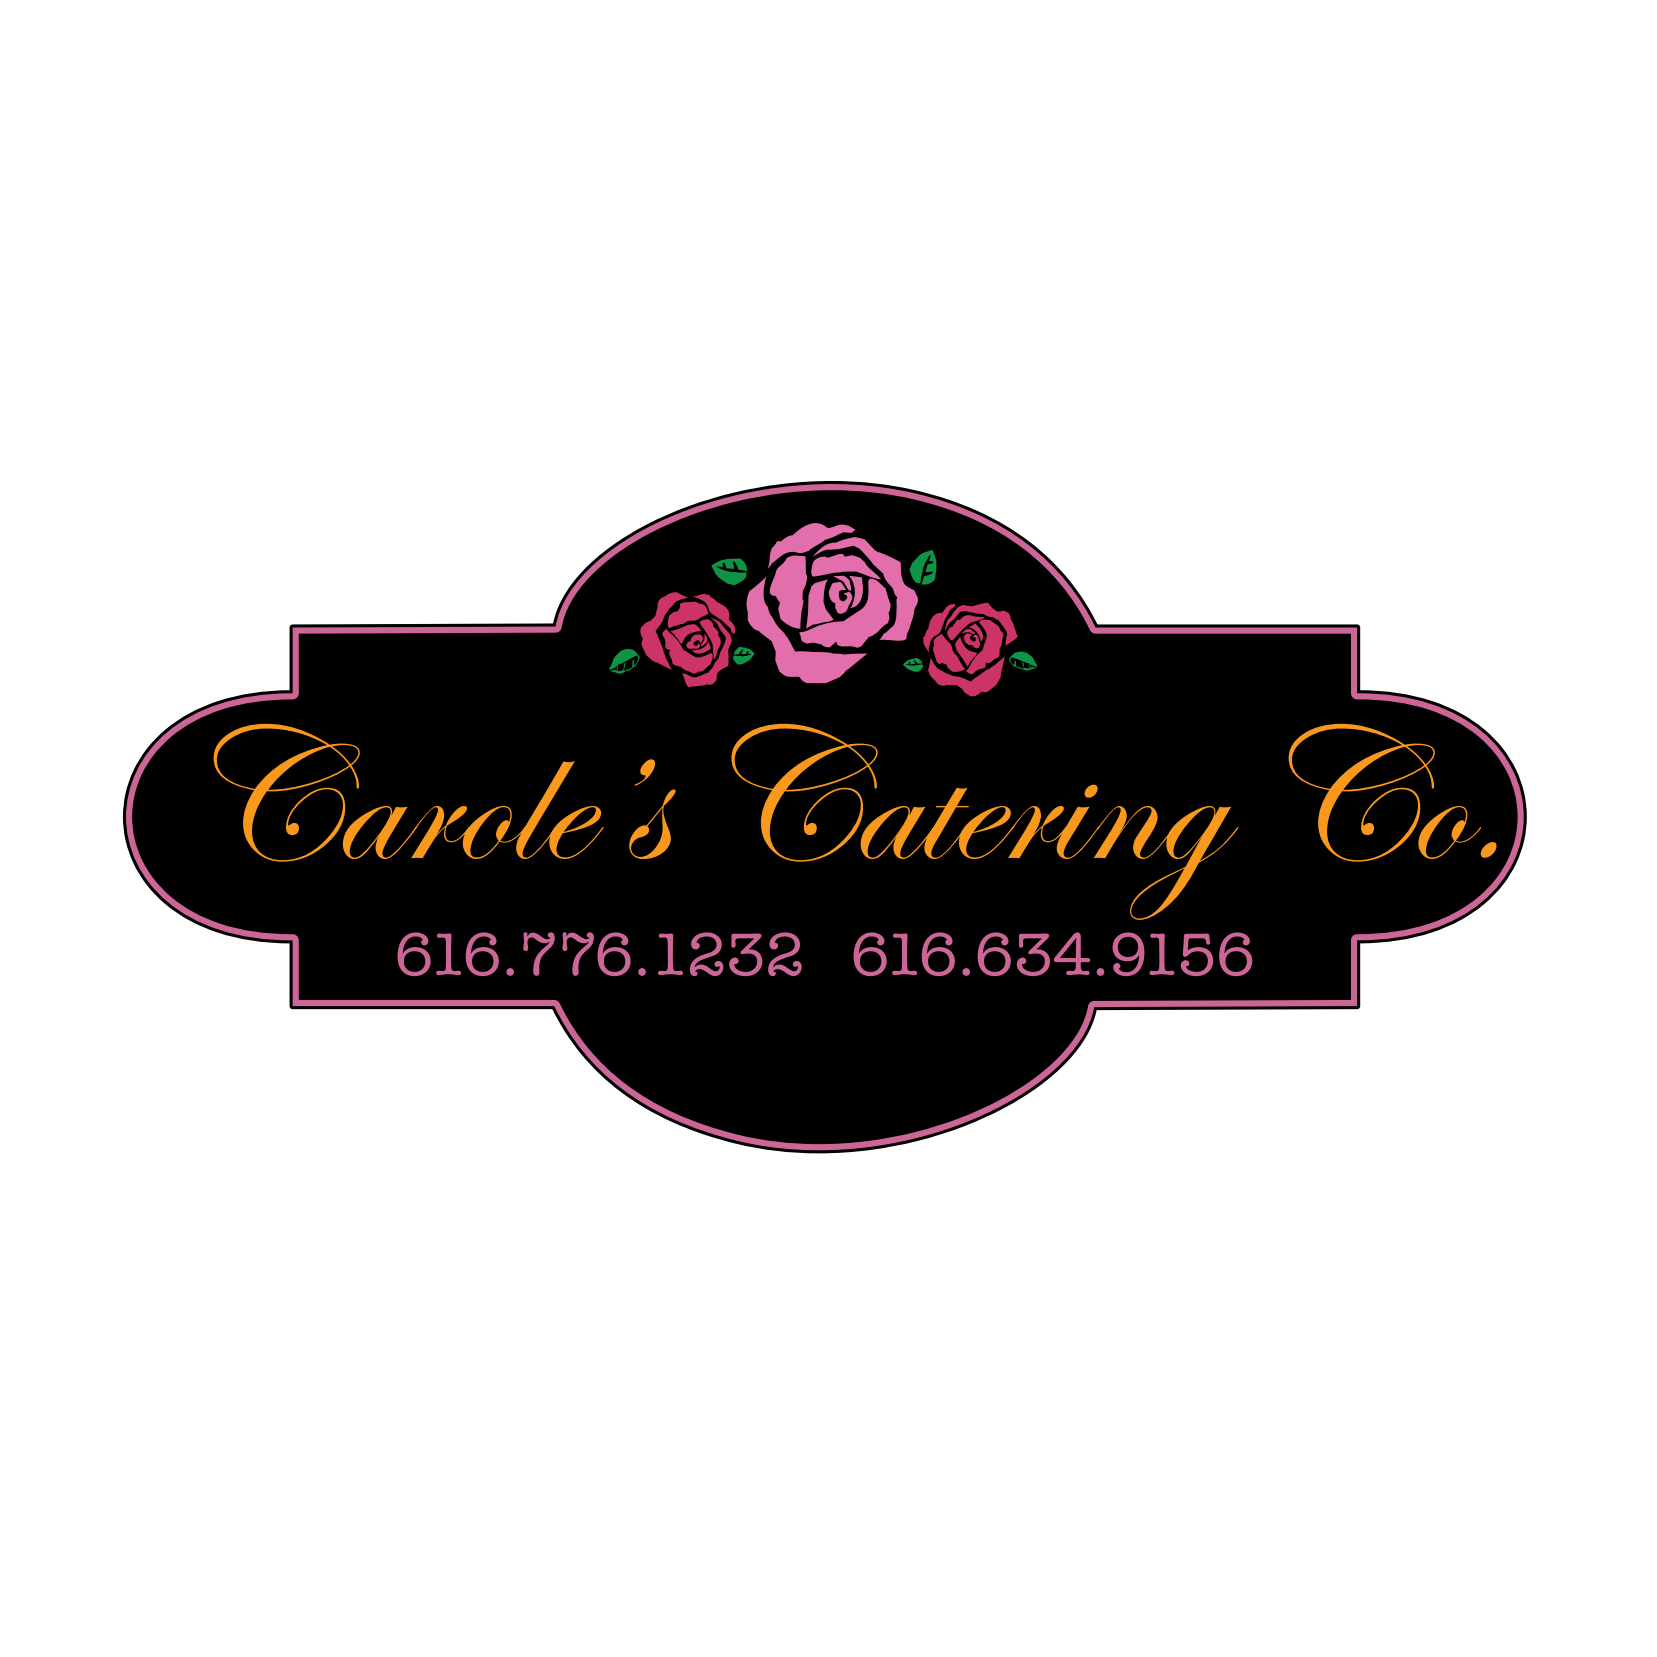 Carole's Catering Co. Photo